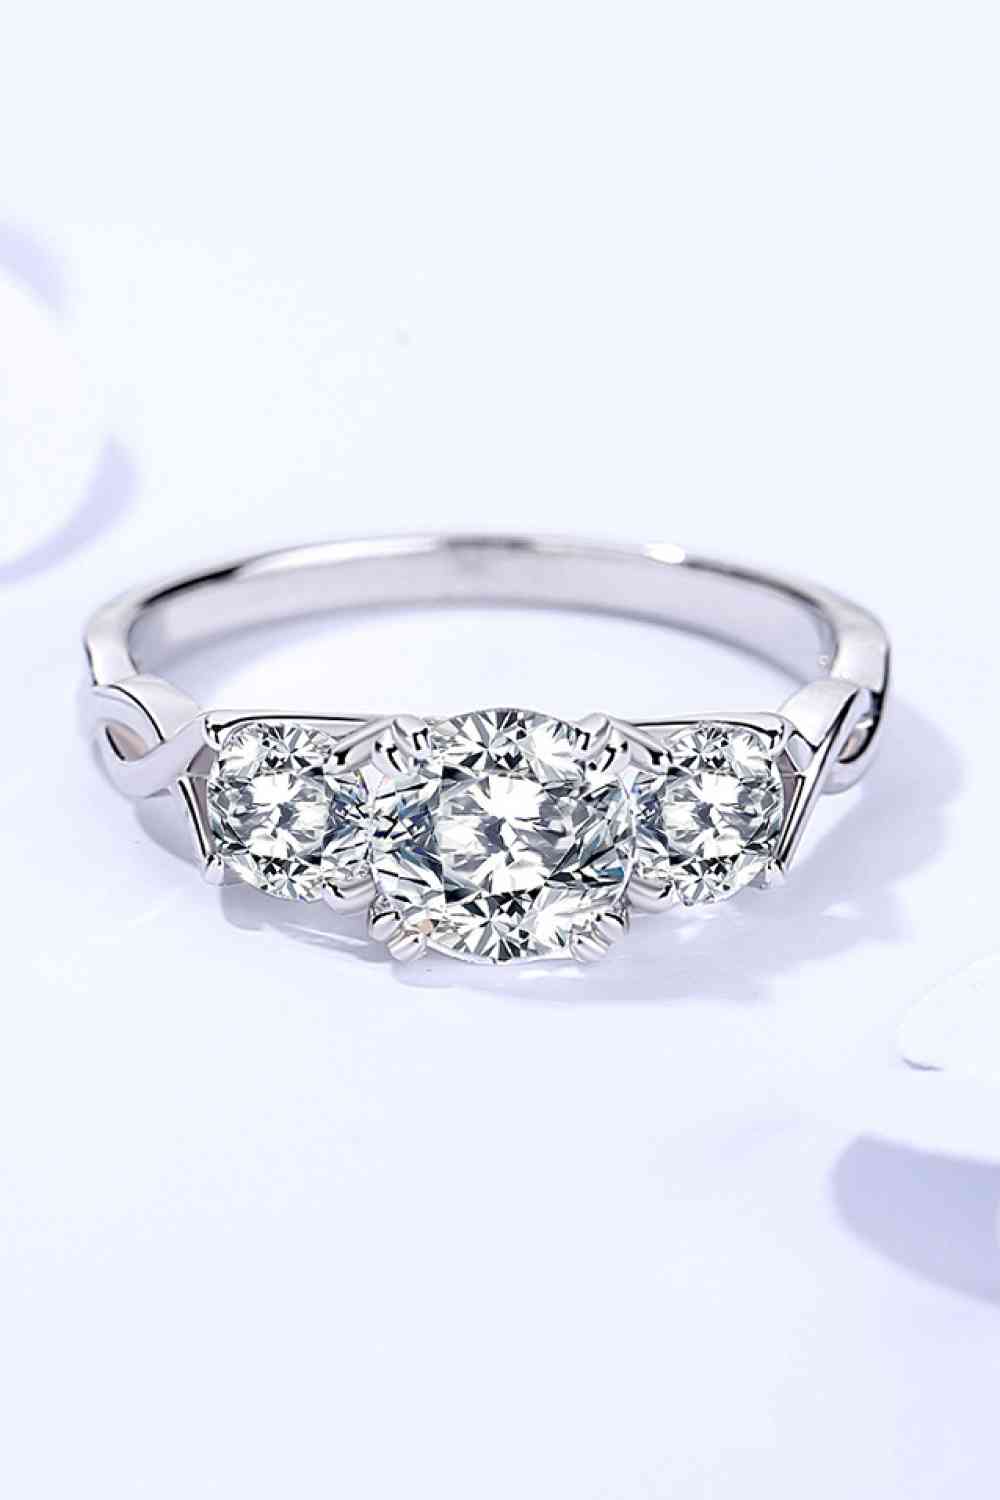 1 Carat Moissanite 925 Sterling Silver Ring - ChicaLux